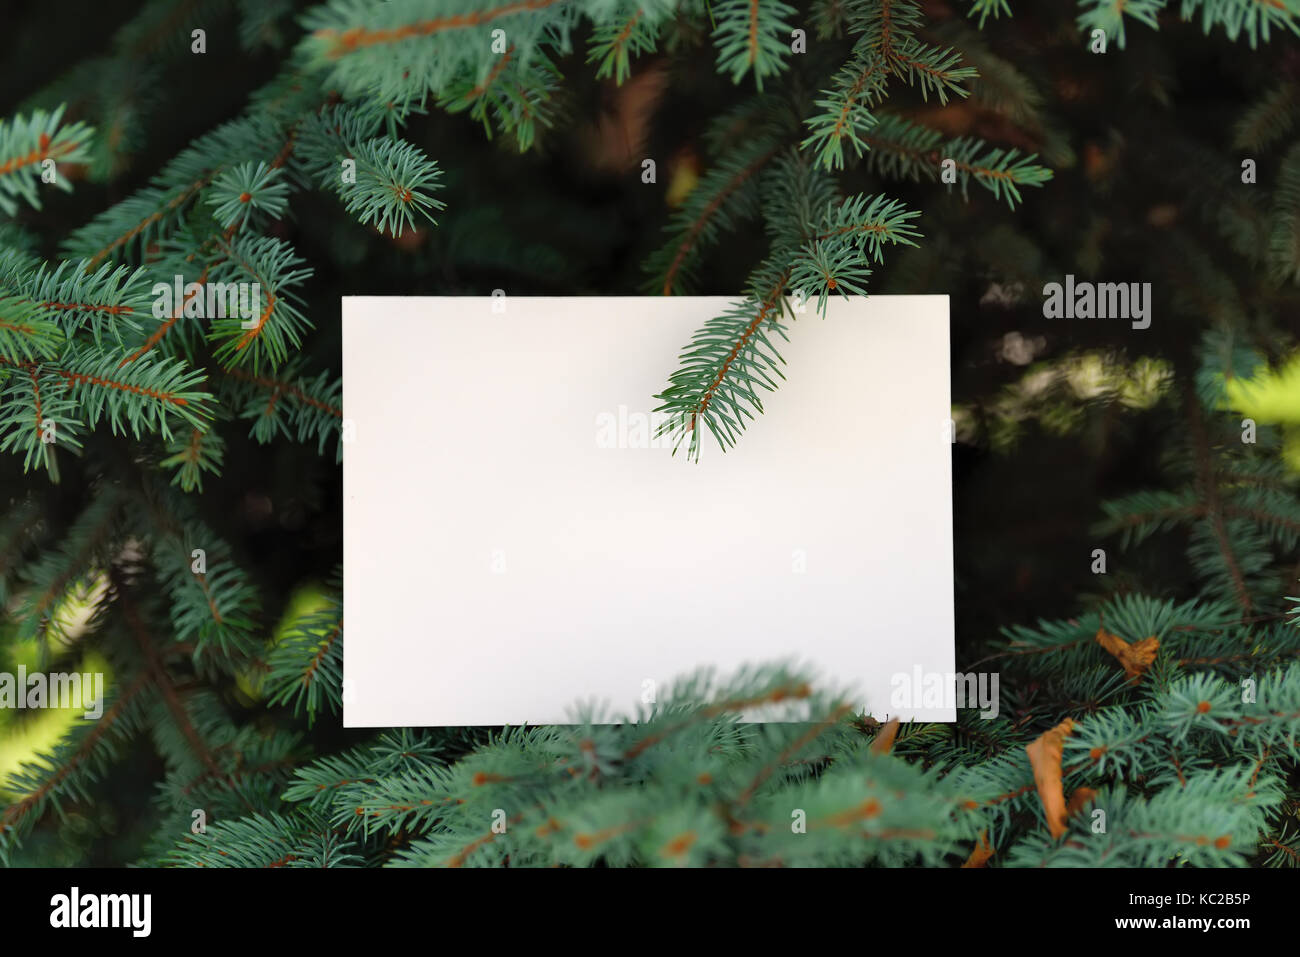 Paper card on green pine tree background Stock Photo